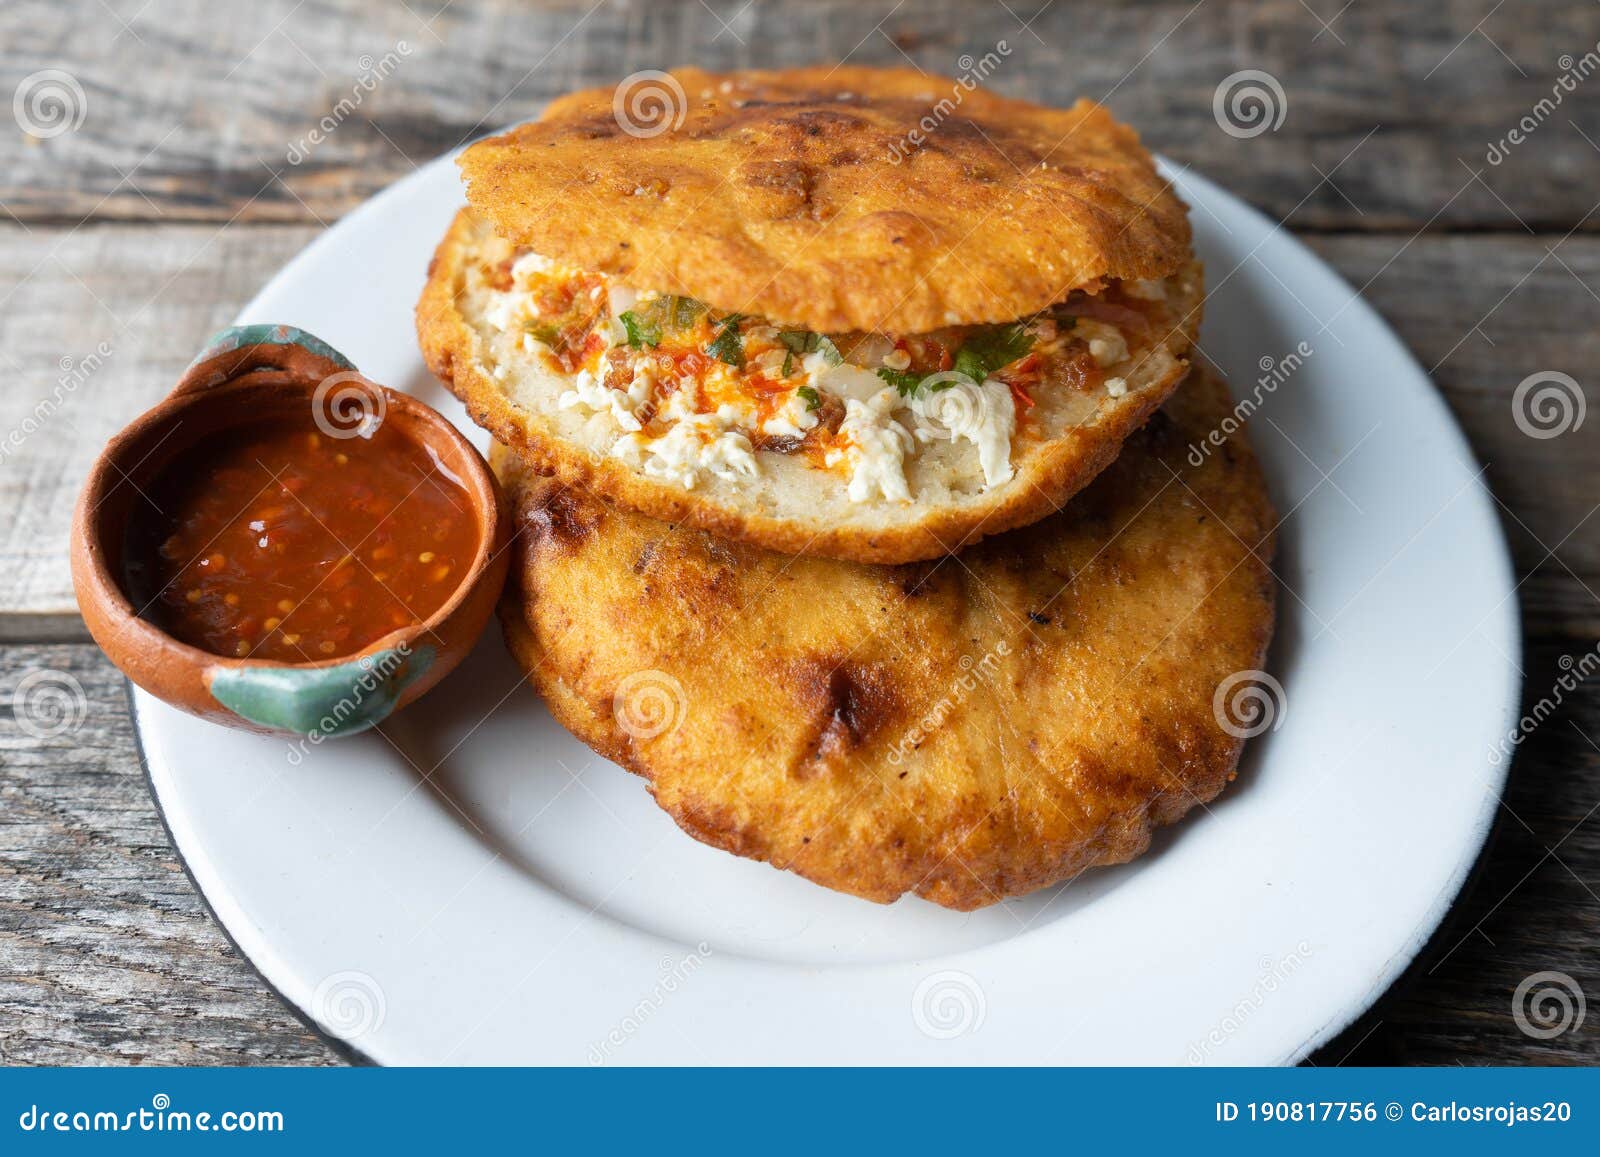 mexican fried gorditas with chicharron